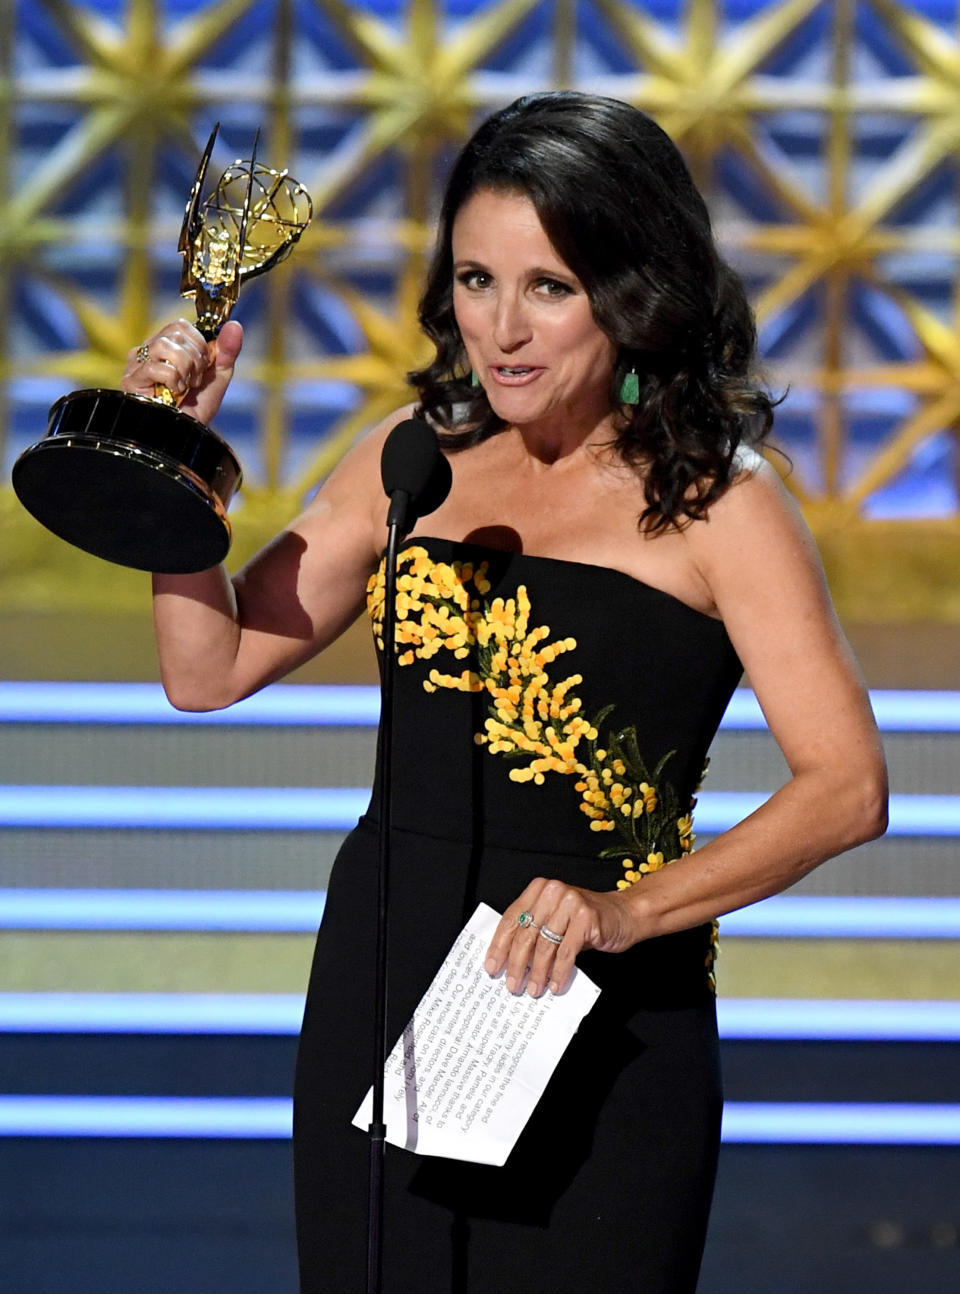 Actor Julia Louis-Dreyfus accepts Outstanding Lead Actress in a Comedy Series for "Veep" onstage during the 69th Annual Primetime Emmy Awards at Microsoft Theater on Sept. 17, 2017 in Los Angeles, California.&nbsp;